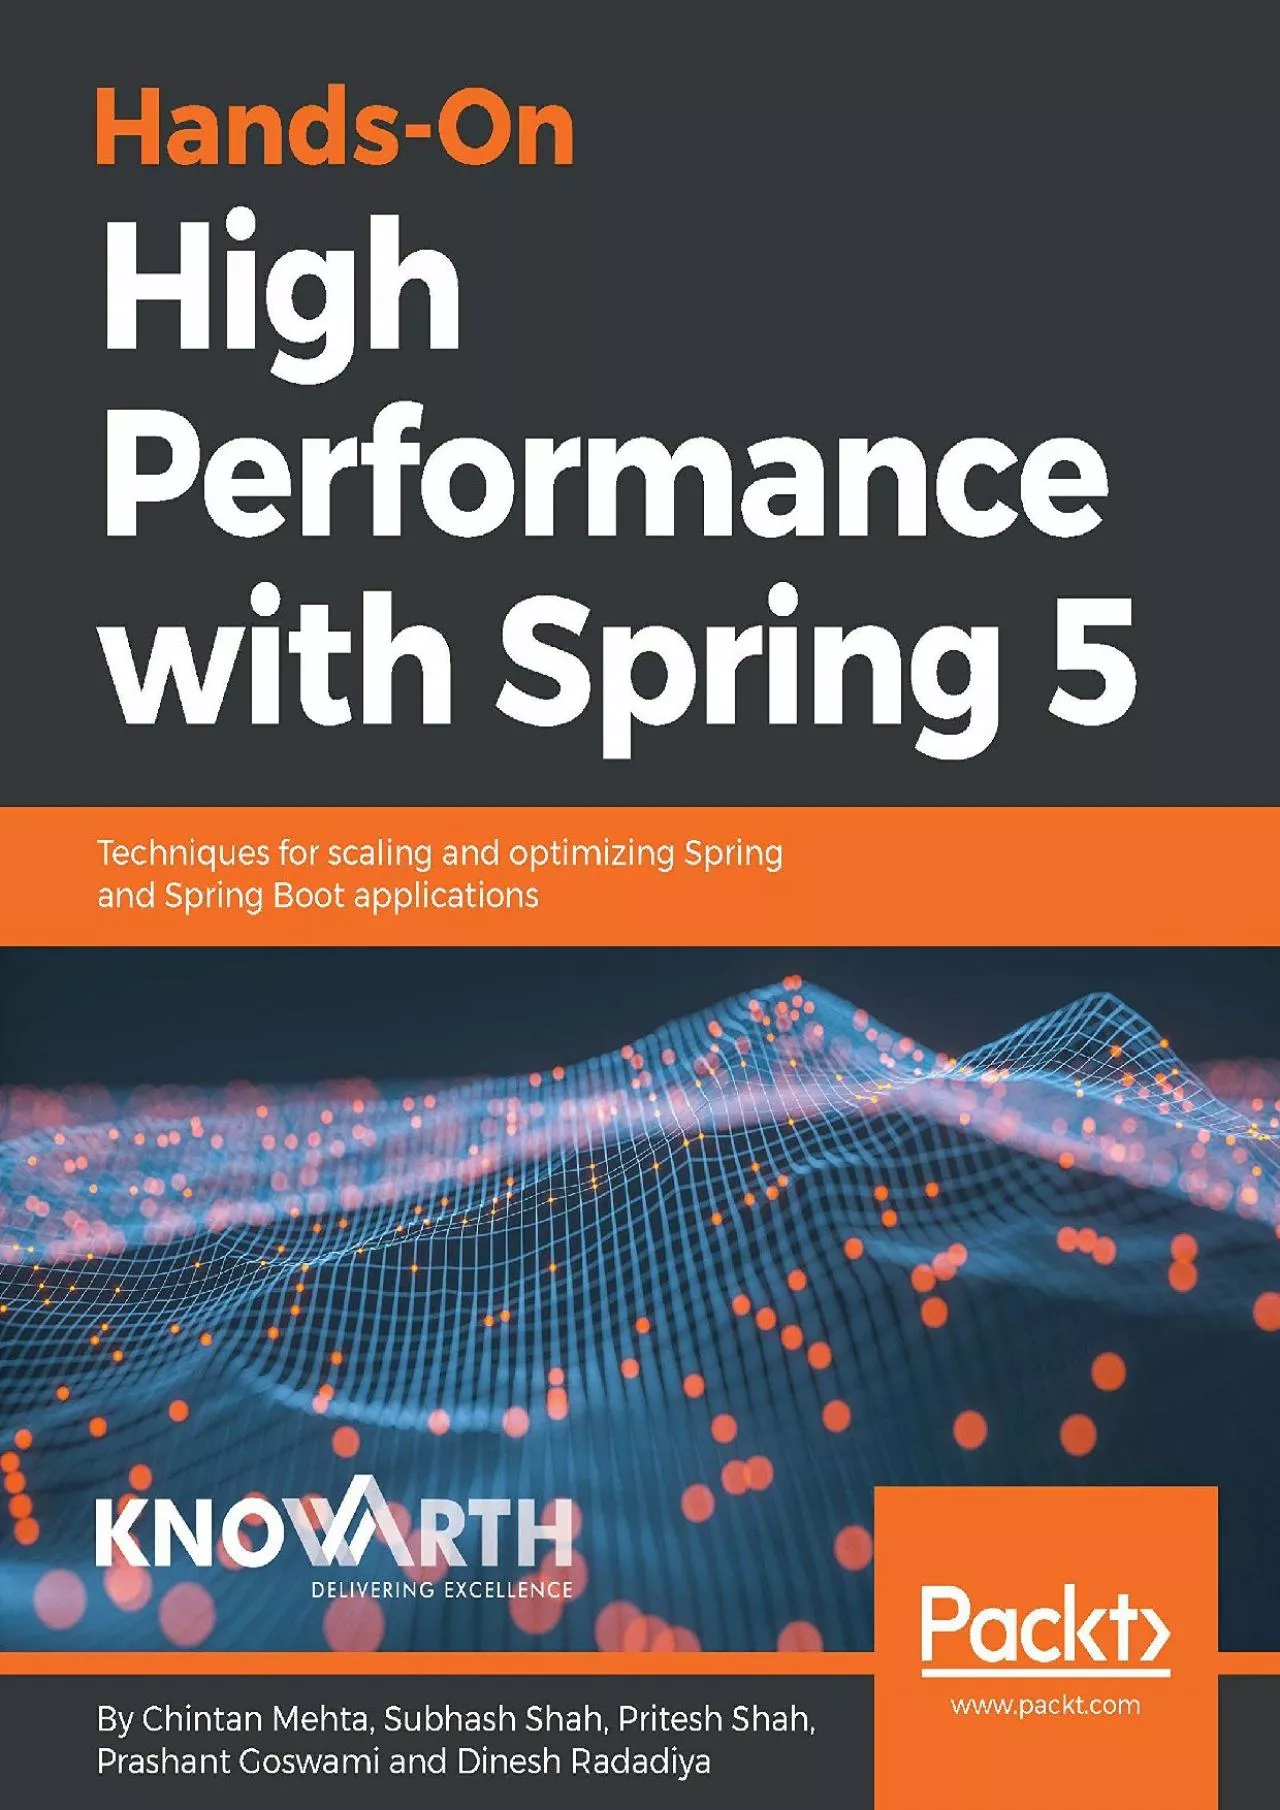 [READING BOOK]-Hands-On High Performance with Spring 5: Techniques for scaling and optimizing